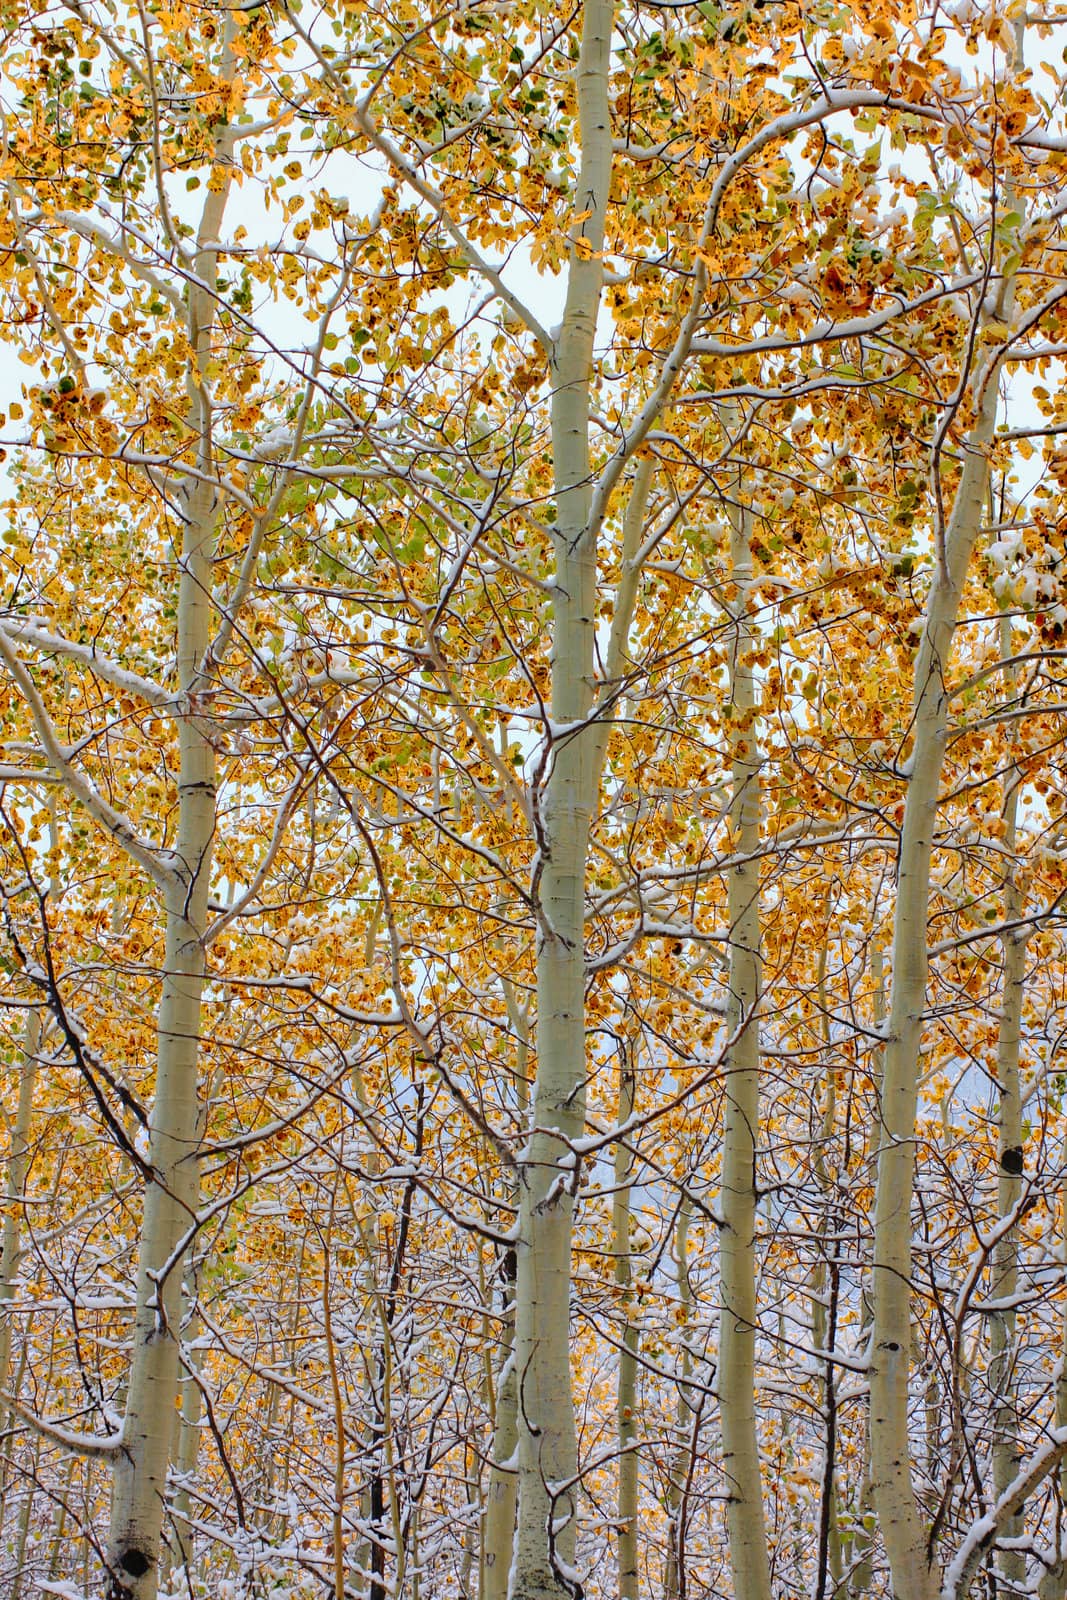 Bright yellow leaves covered with snowfall in the Bridger Teton National Forest of Wyoming.